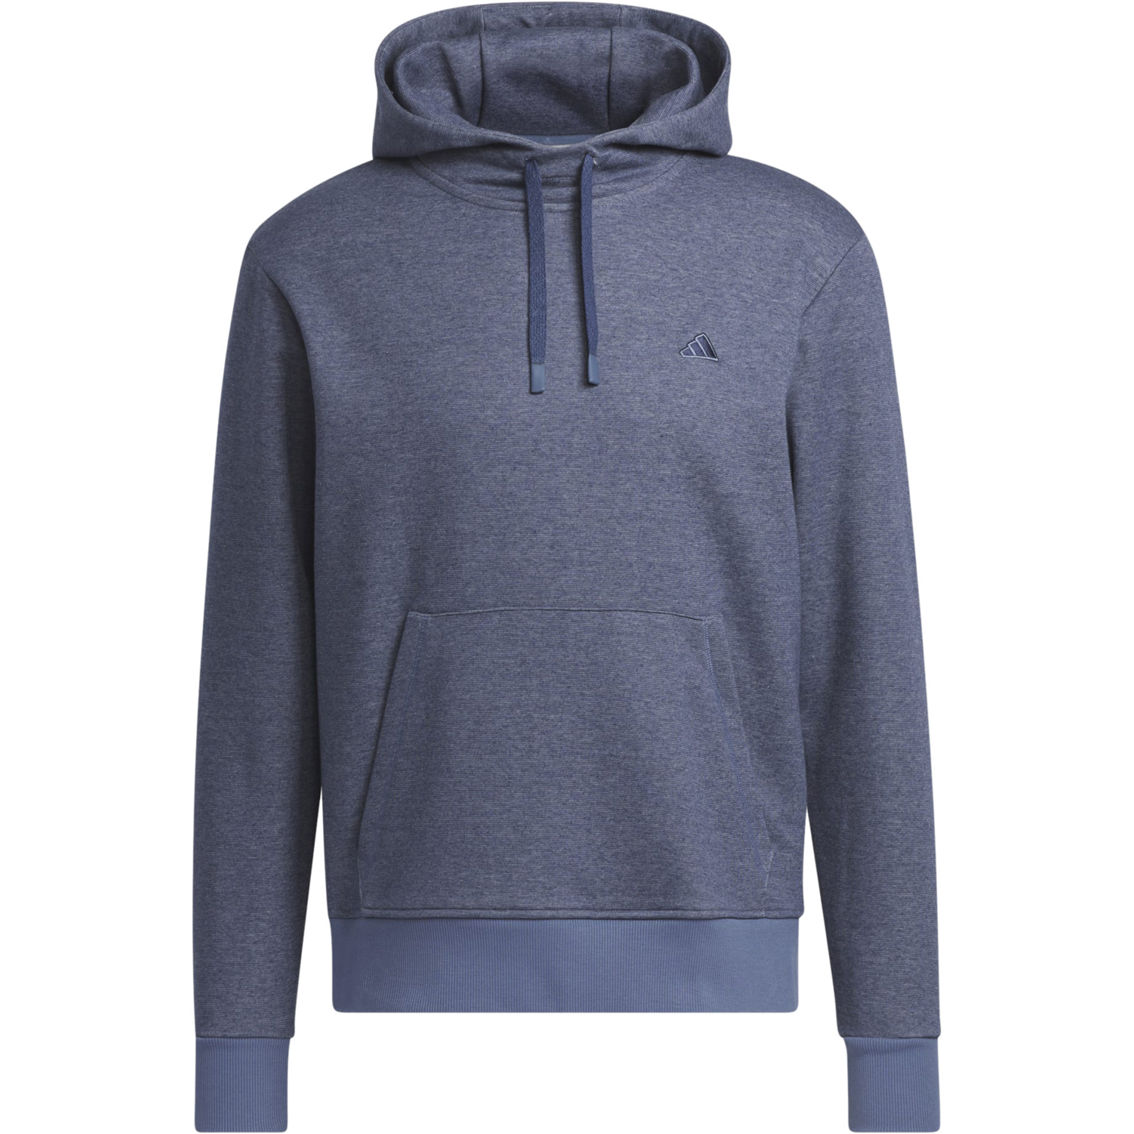 adidas Go-To Hoodie - Image 6 of 6